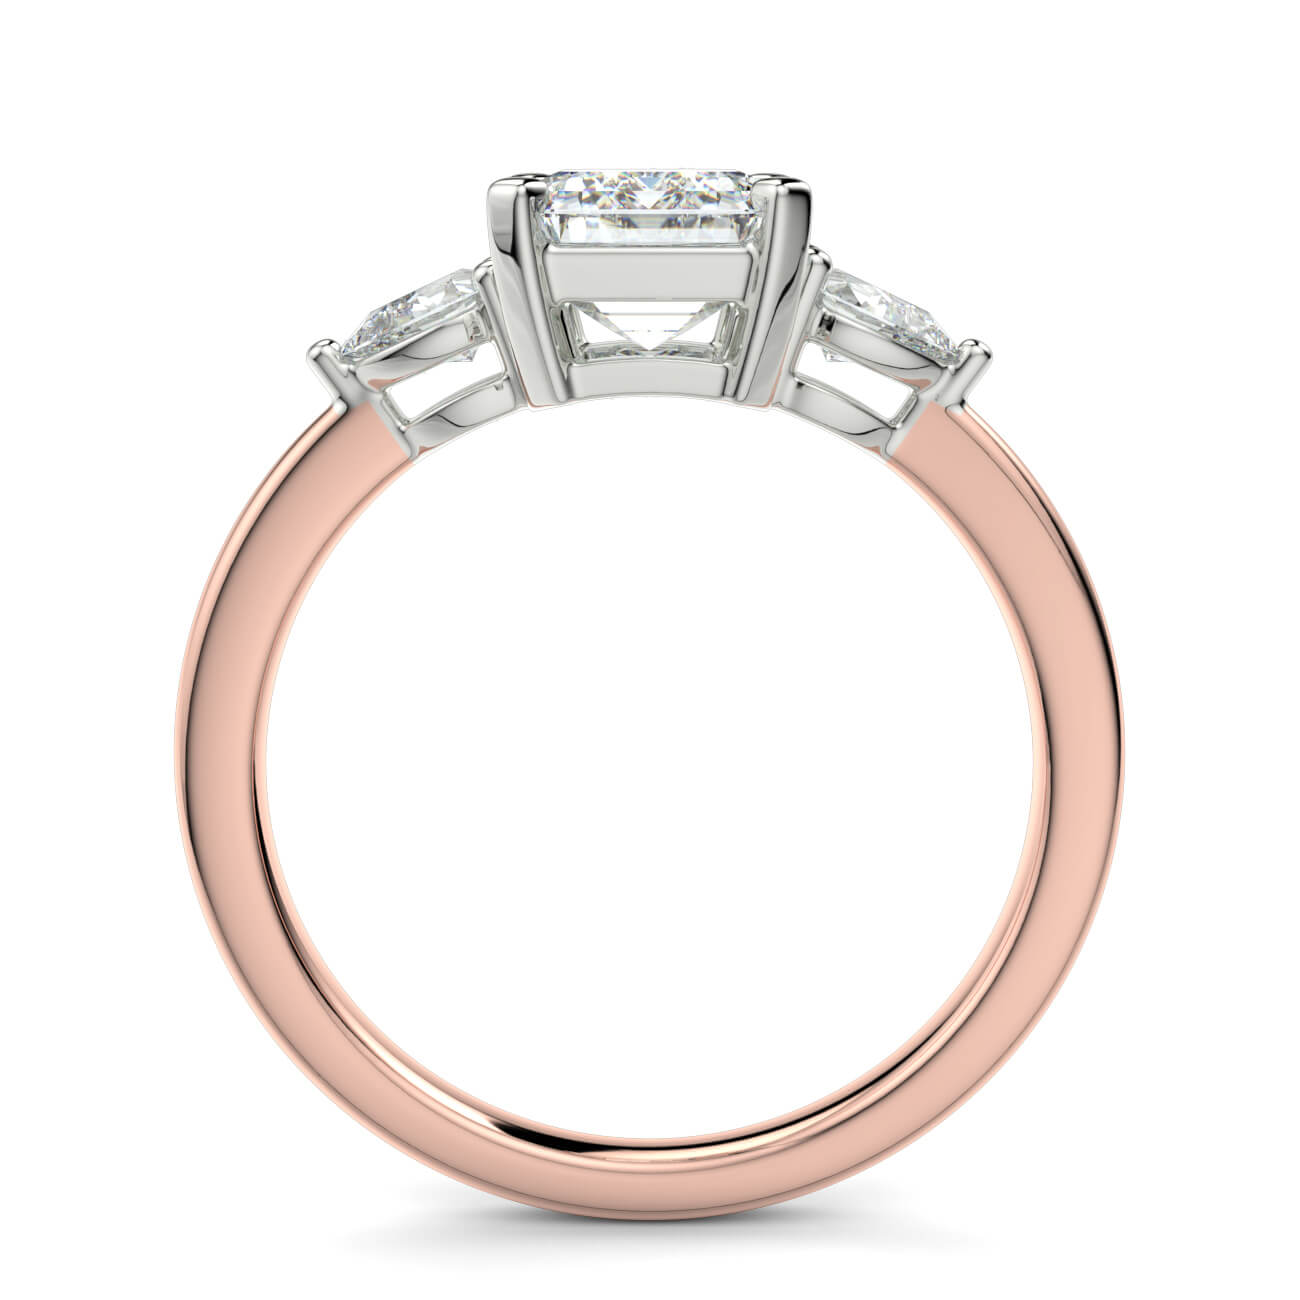 Emerald Cut Diamond Ring With Pear Shape Side Diamonds In Rose and White Gold – Australian Diamond Network